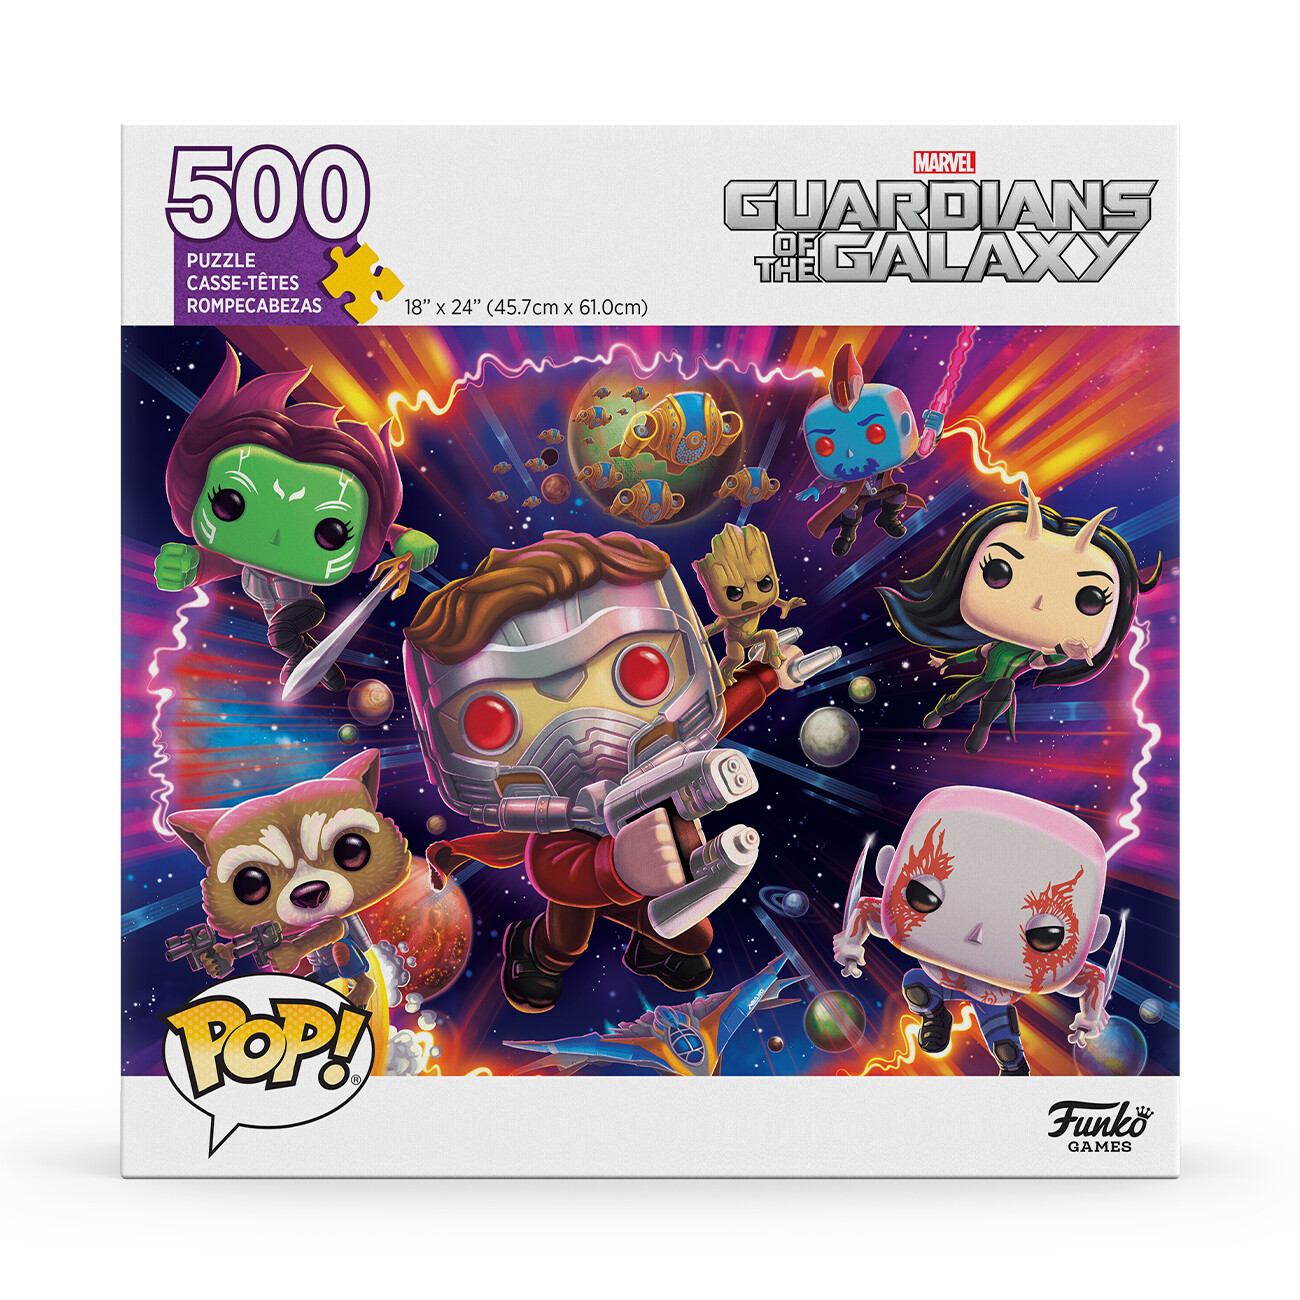 Marvel's Guardians of the Galaxy Puzzle - Funko Pop Games